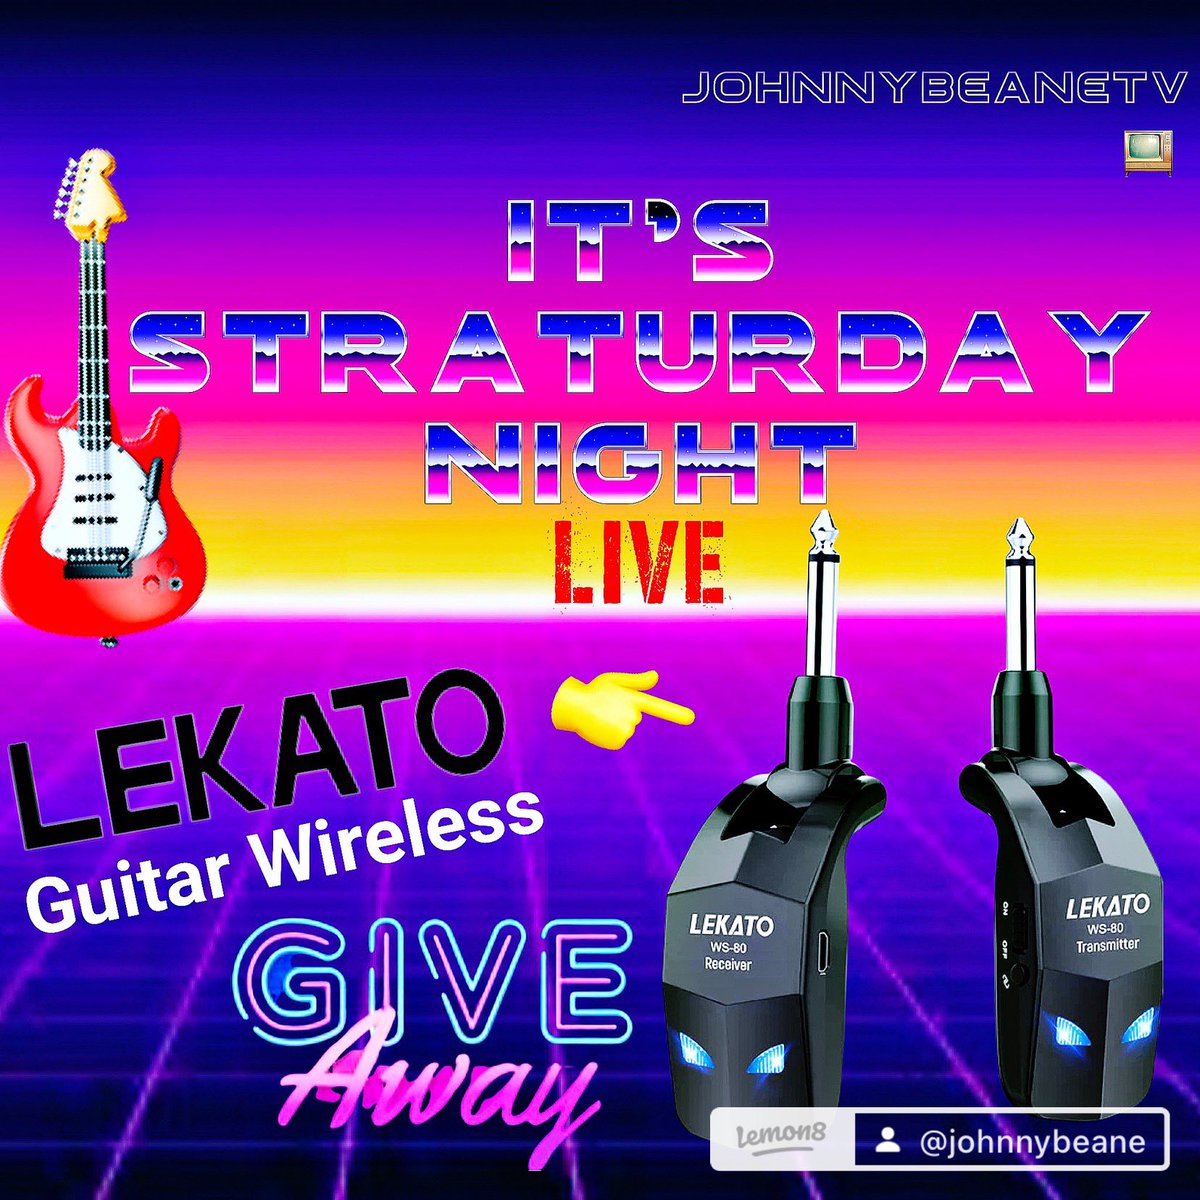 Join us tonight at 10:30 PM Eastern for 'Straturday Night LIVE' where we're giving away a LEKATO Guitar Wireless system! Tune in as we discuss all things music, guitars, and more. #SNL #Straturday #LEKATO #evhgear #KramerGuitars #johnnybeaneTV #EddieVanHalen #vanhalen